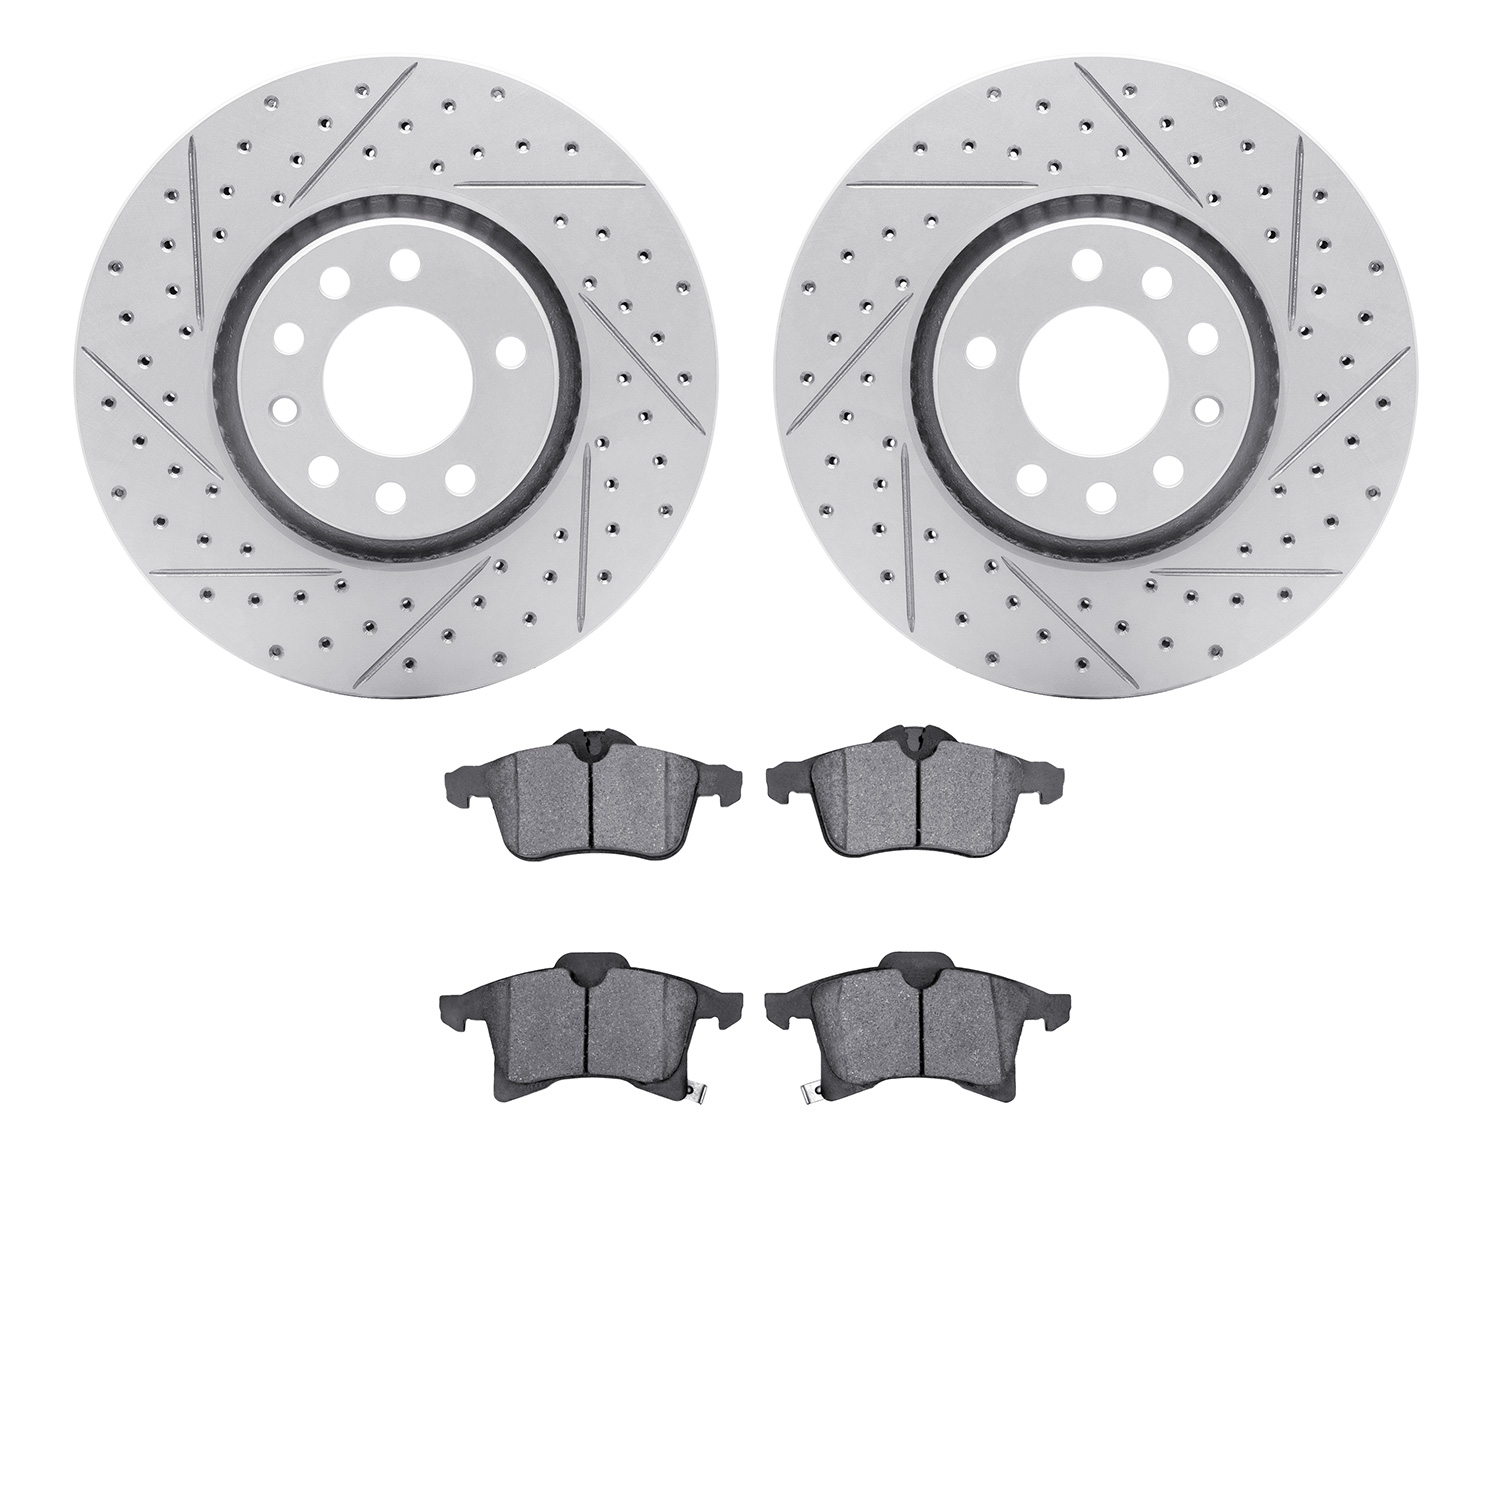 2502-65007 Geoperformance Drilled/Slotted Rotors w/5000 Advanced Brake Pads Kit, 2004-2008 GM, Position: Front